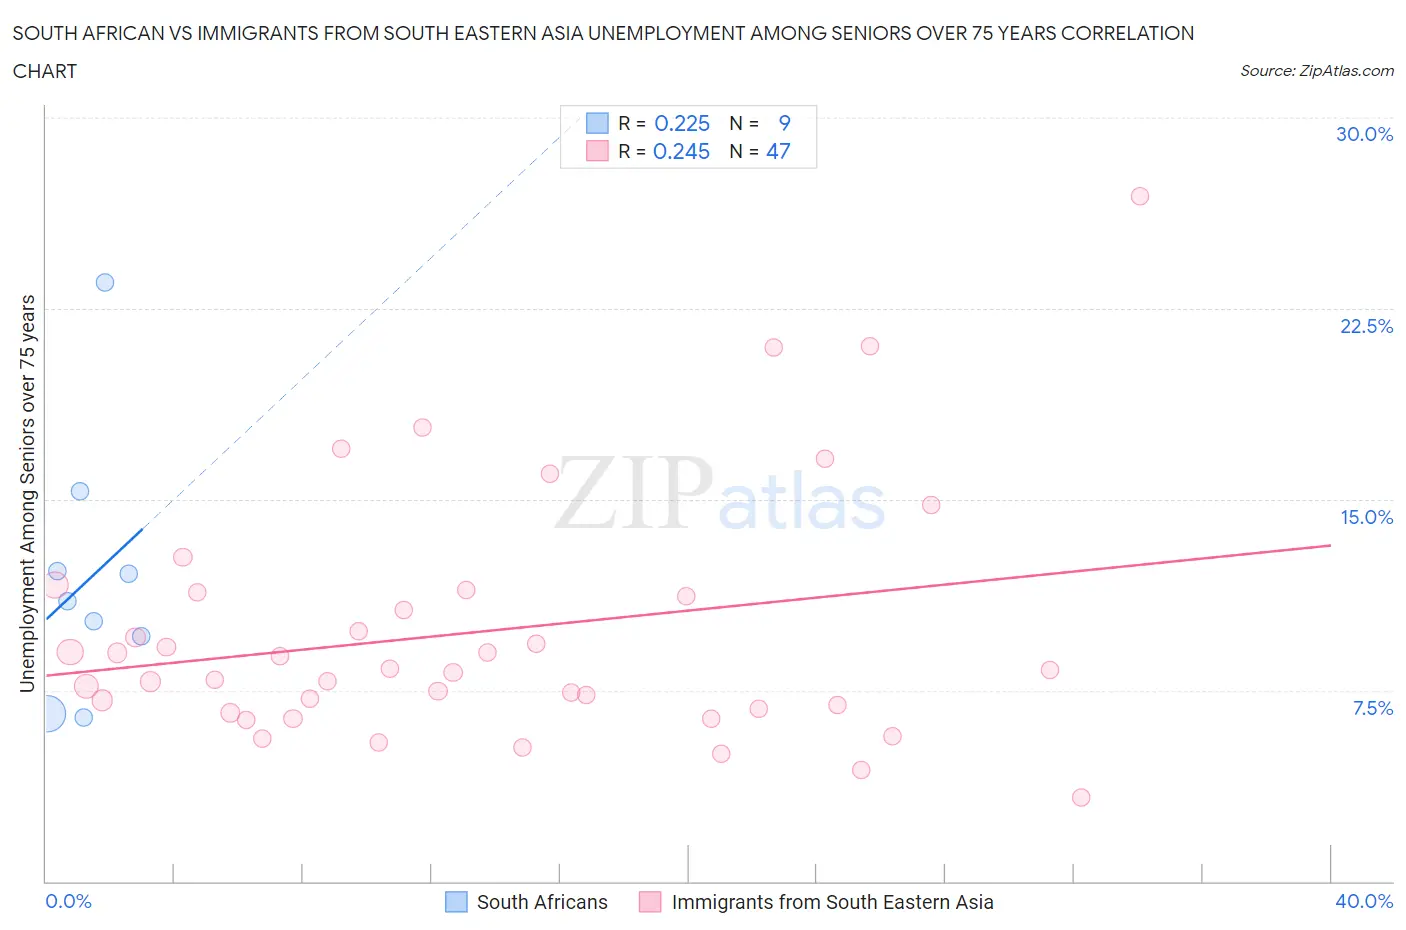 South African vs Immigrants from South Eastern Asia Unemployment Among Seniors over 75 years